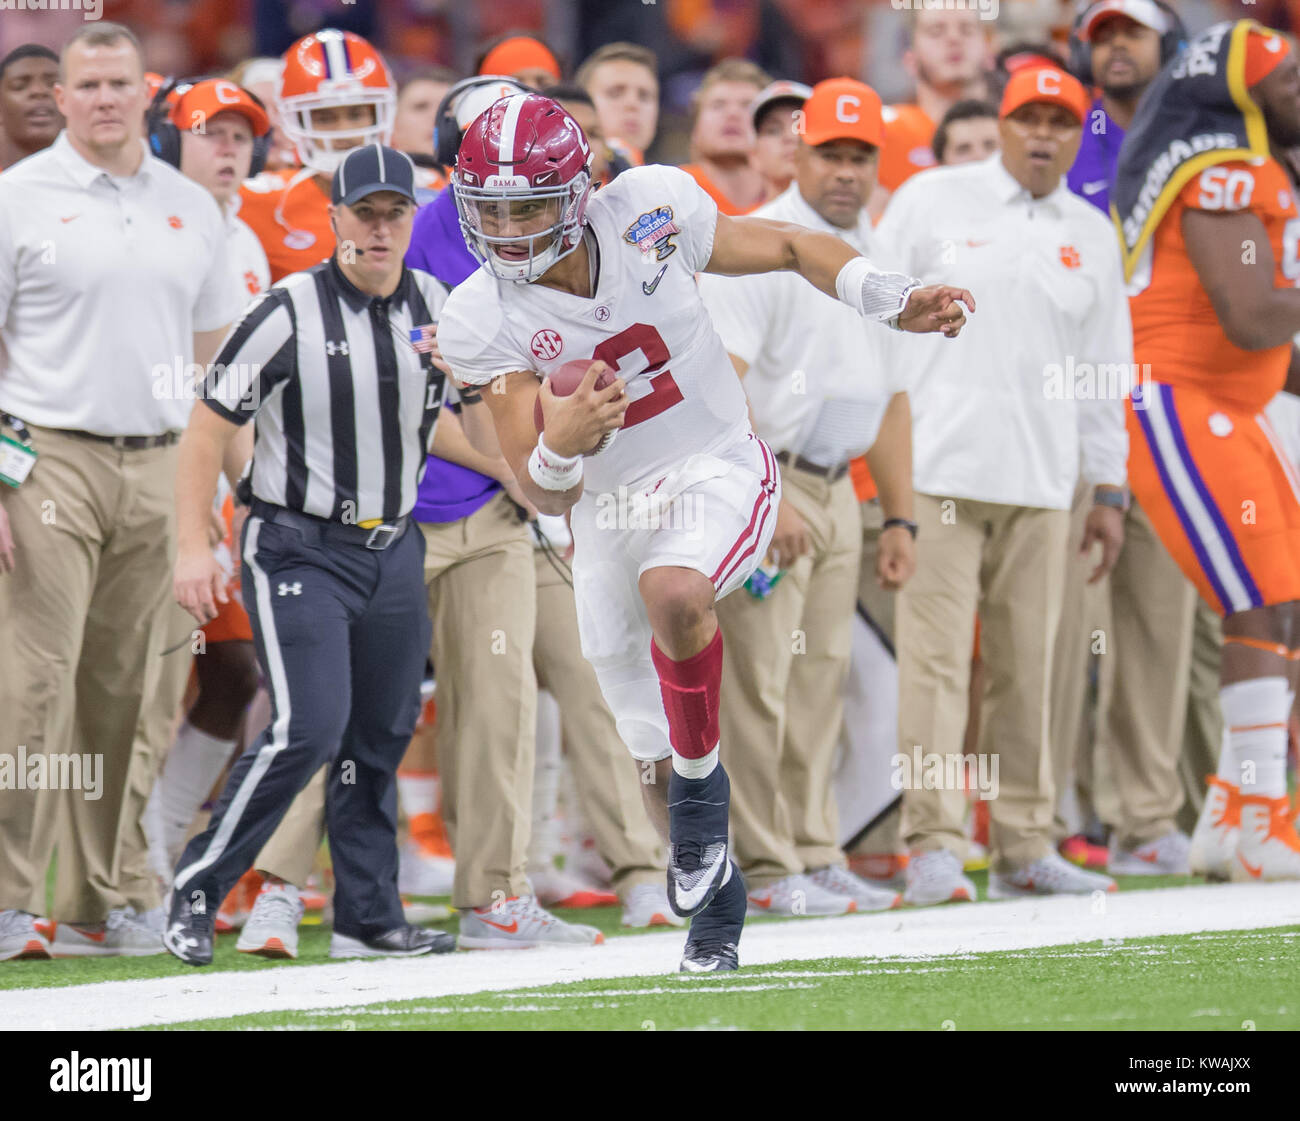 New Orleans, LA, USA. 1st Jan, 2018. Alabama QB Jalen Hurts #2 tip toes along the sidelines during the Allstate Sugar Bowl football game between the Clemson Tigers and the Alabama Crimson Tide at the Mercedes-Benz Supedome in New Orleans, LA. Kyle Okita/CSM/Alamy Live News Stock Photo